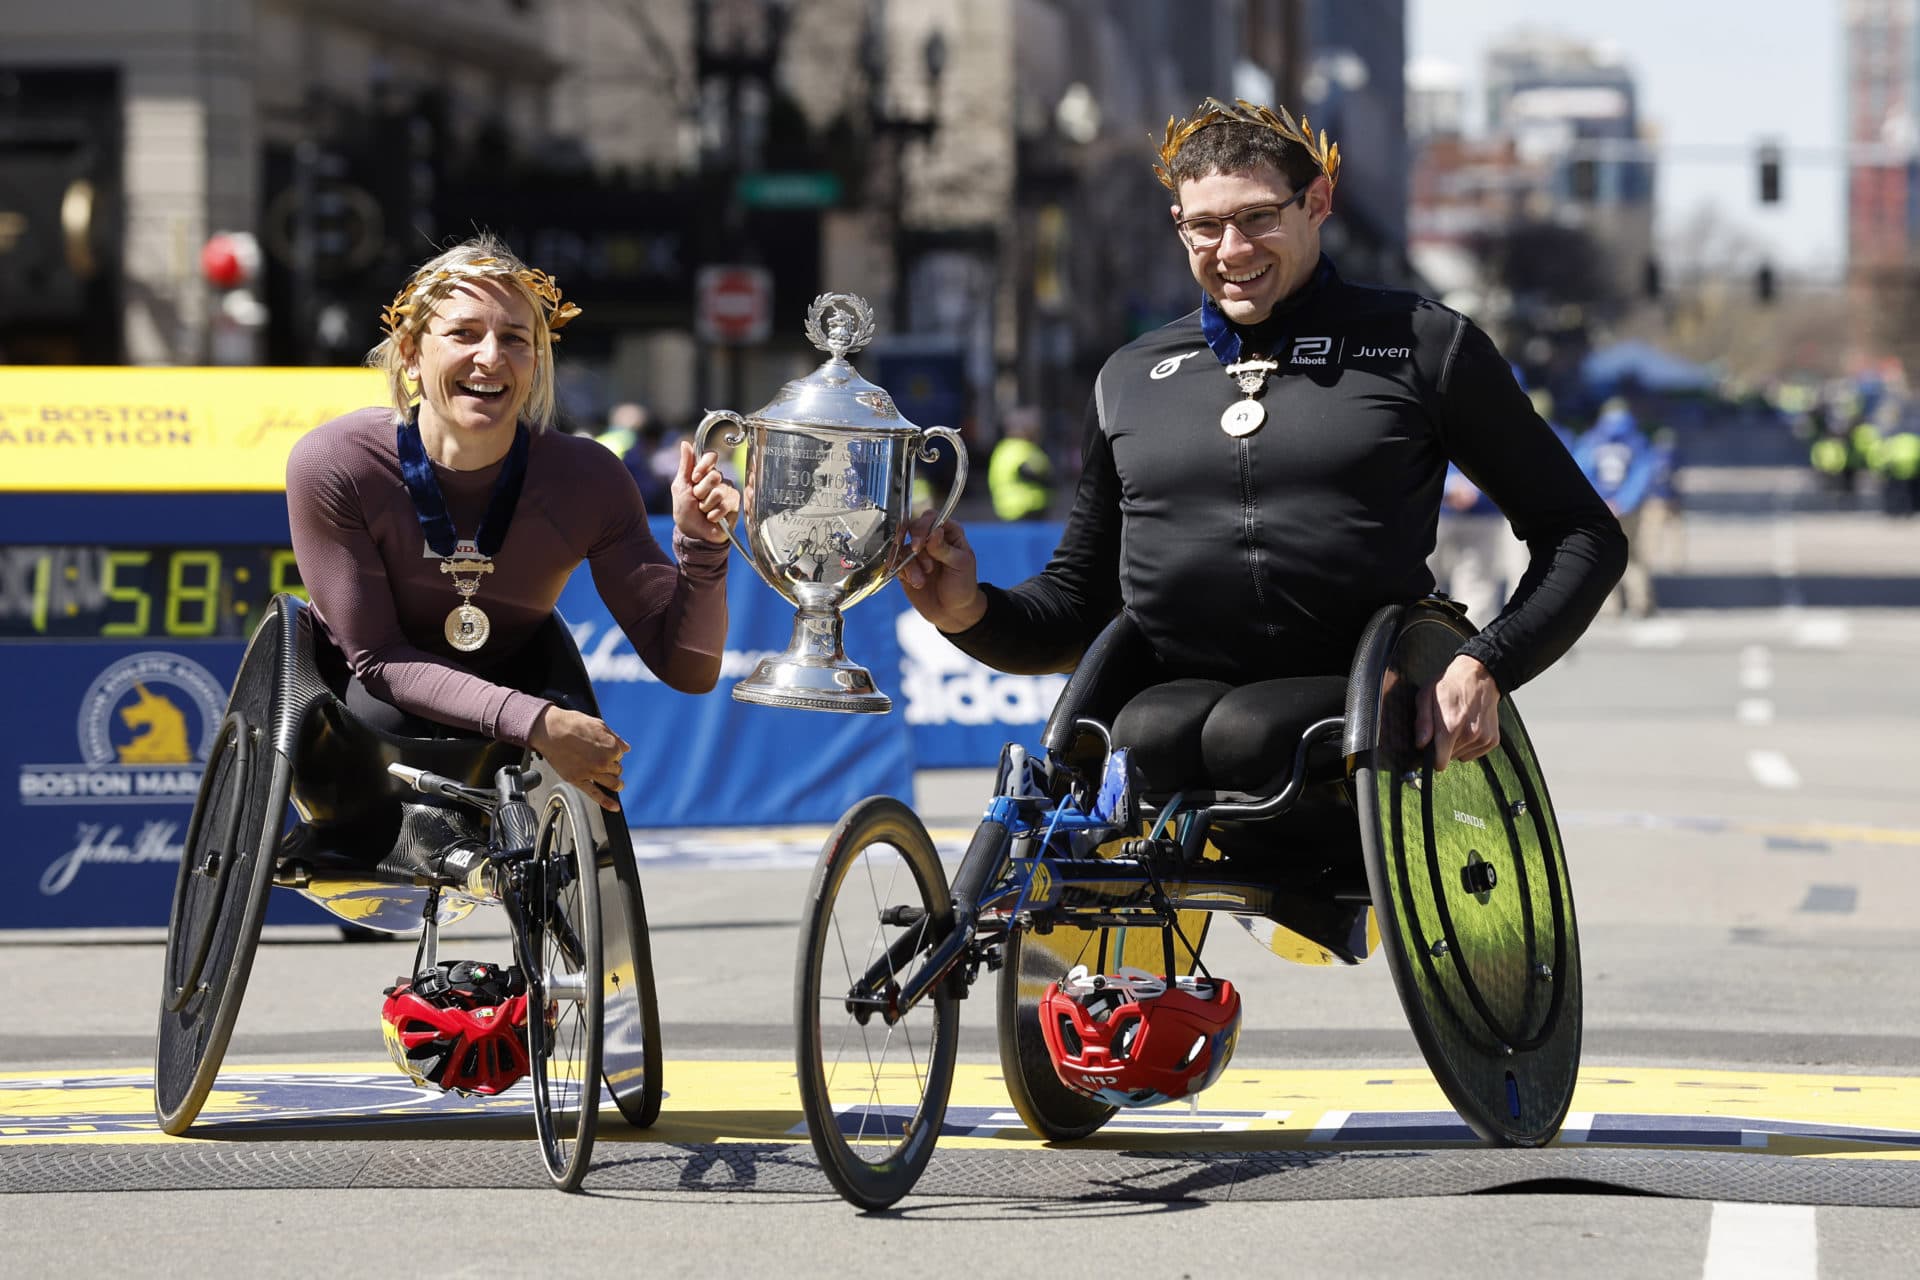 Manuela Schar, of Switzerland, left, and Daniel Romanchuck, of the United States, hold the trophy after winning the men's and women's wheelchair divisions of the 126th Boston Marathon. (Winslow Townson/AP)